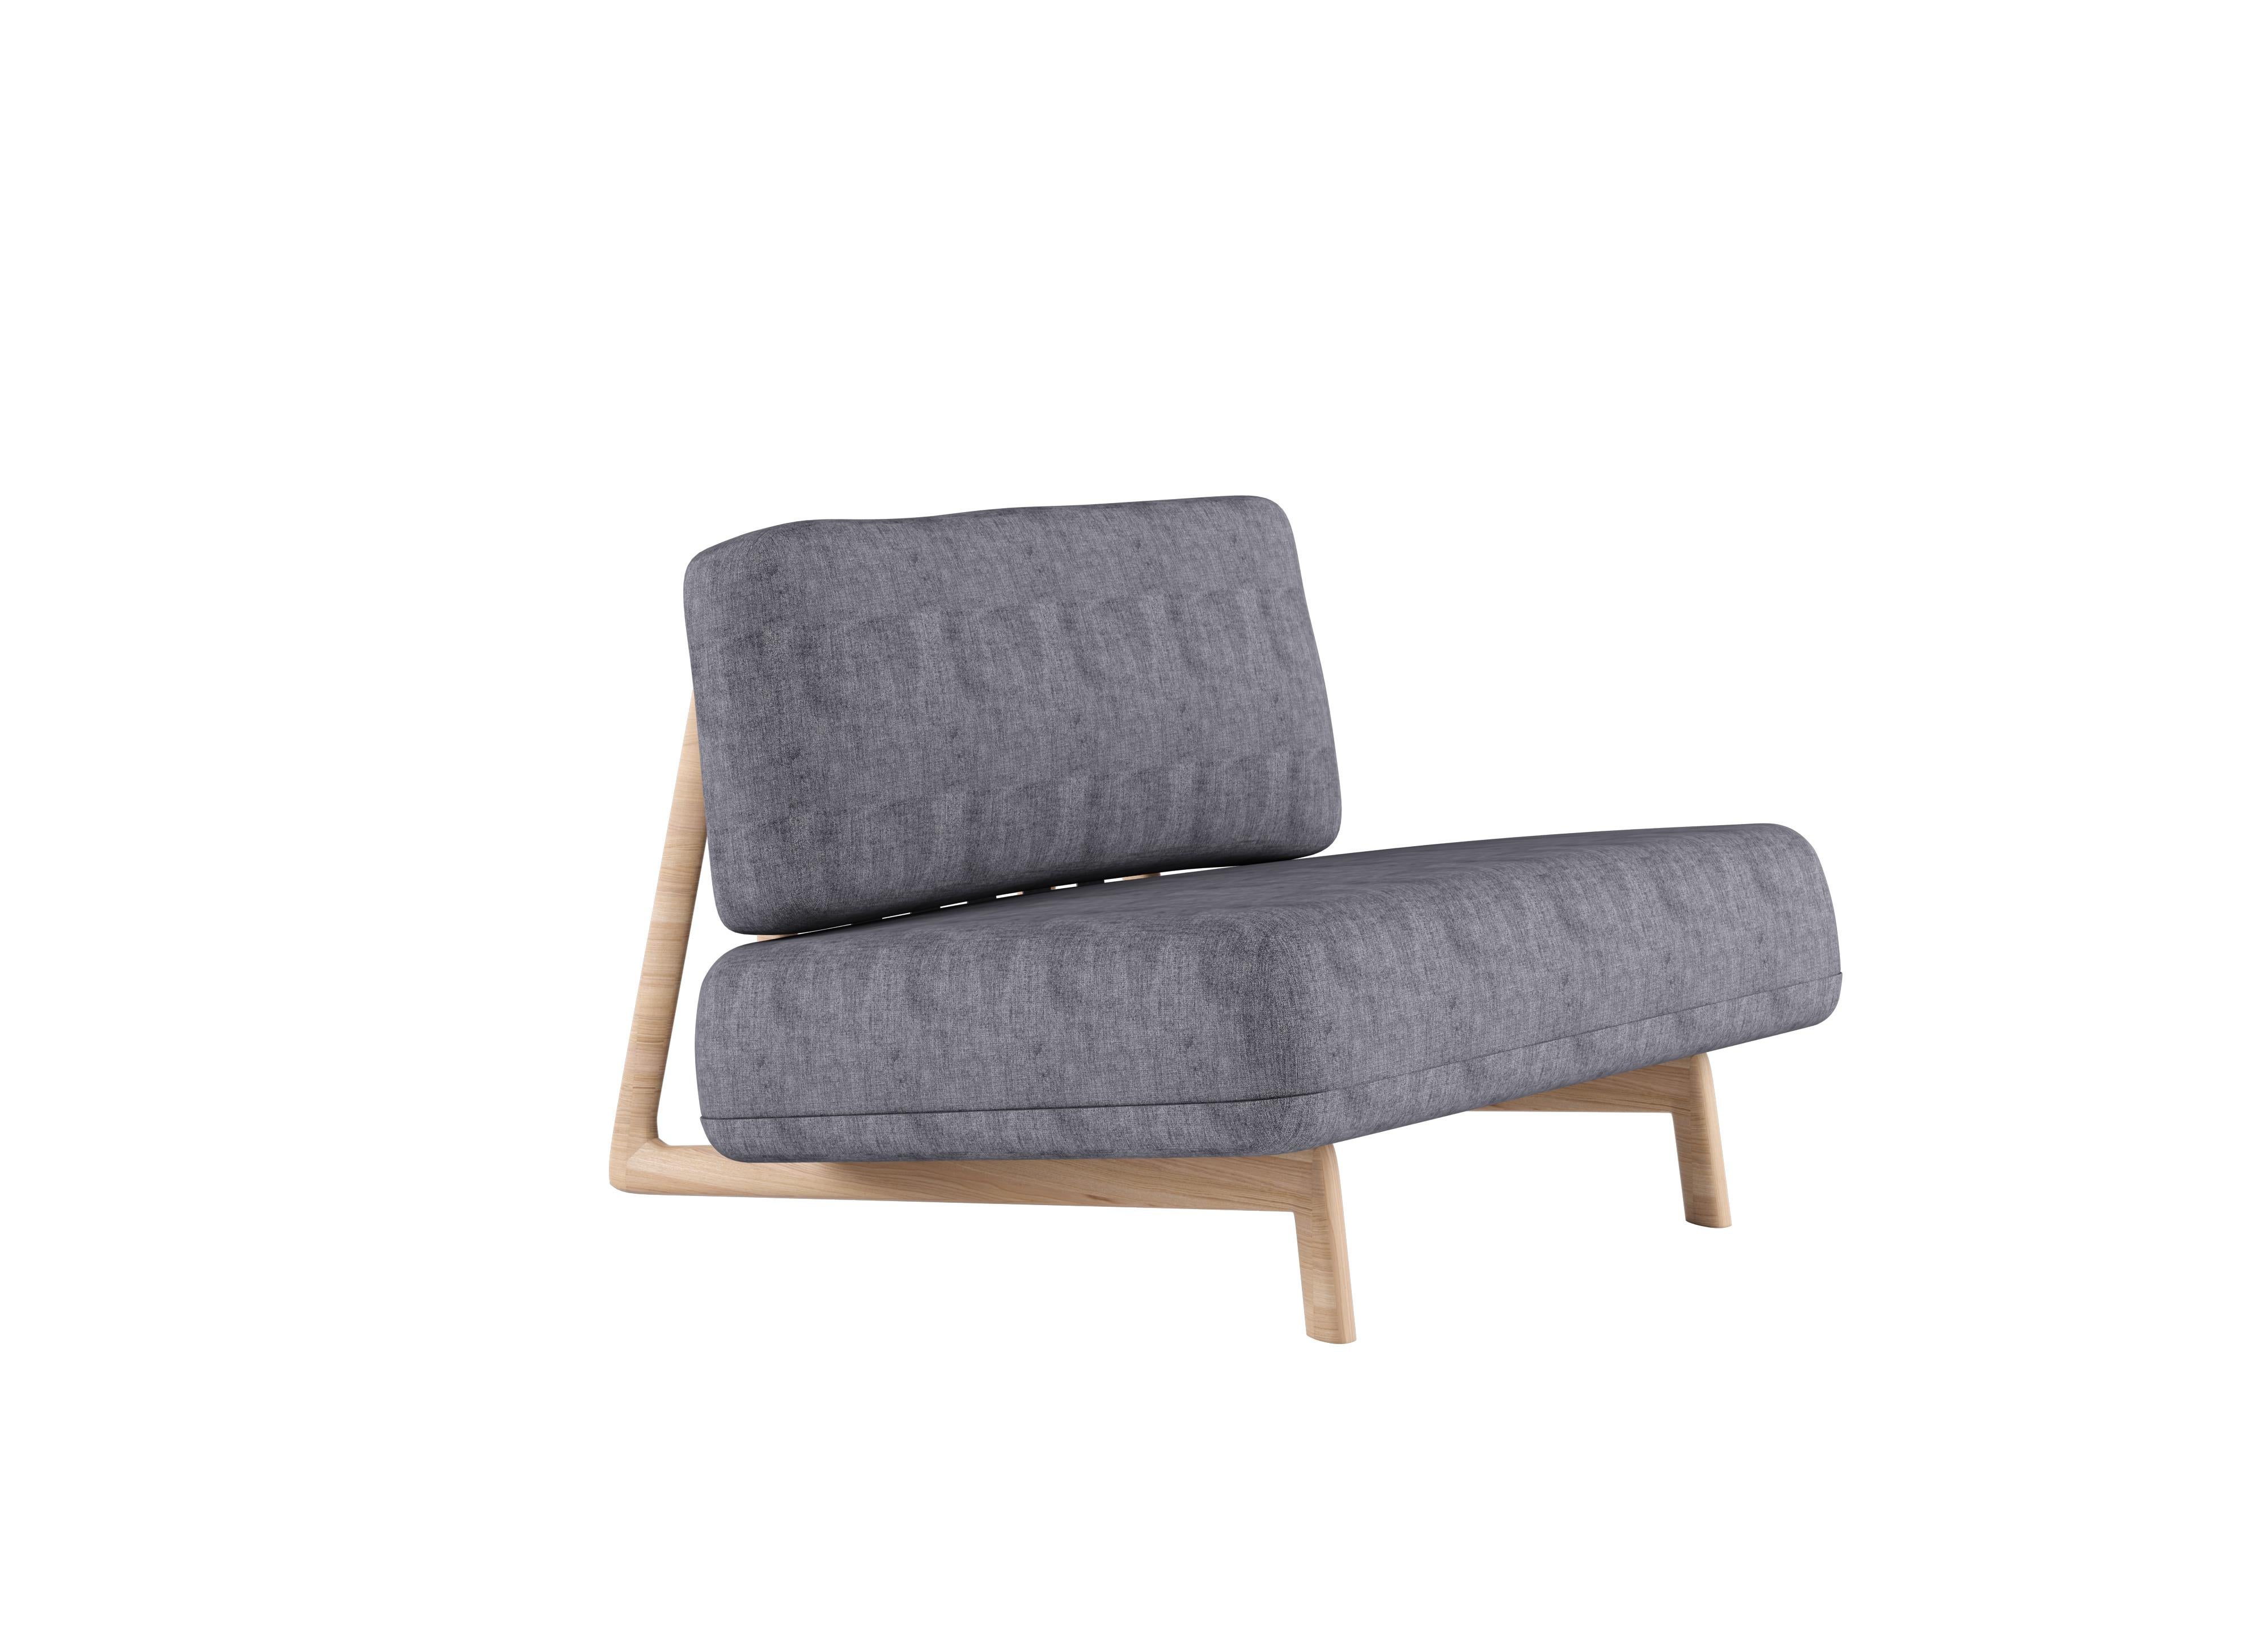 Alias D10 Trigono Armchair in Grey Upholstery with Natural Oak Frame by Michele De Lucch

Armchair with structure in solid oak andÂ belts in fabric or leather.Seat and back combined with removable cover in fabric or leather.NOTES: the seat has a